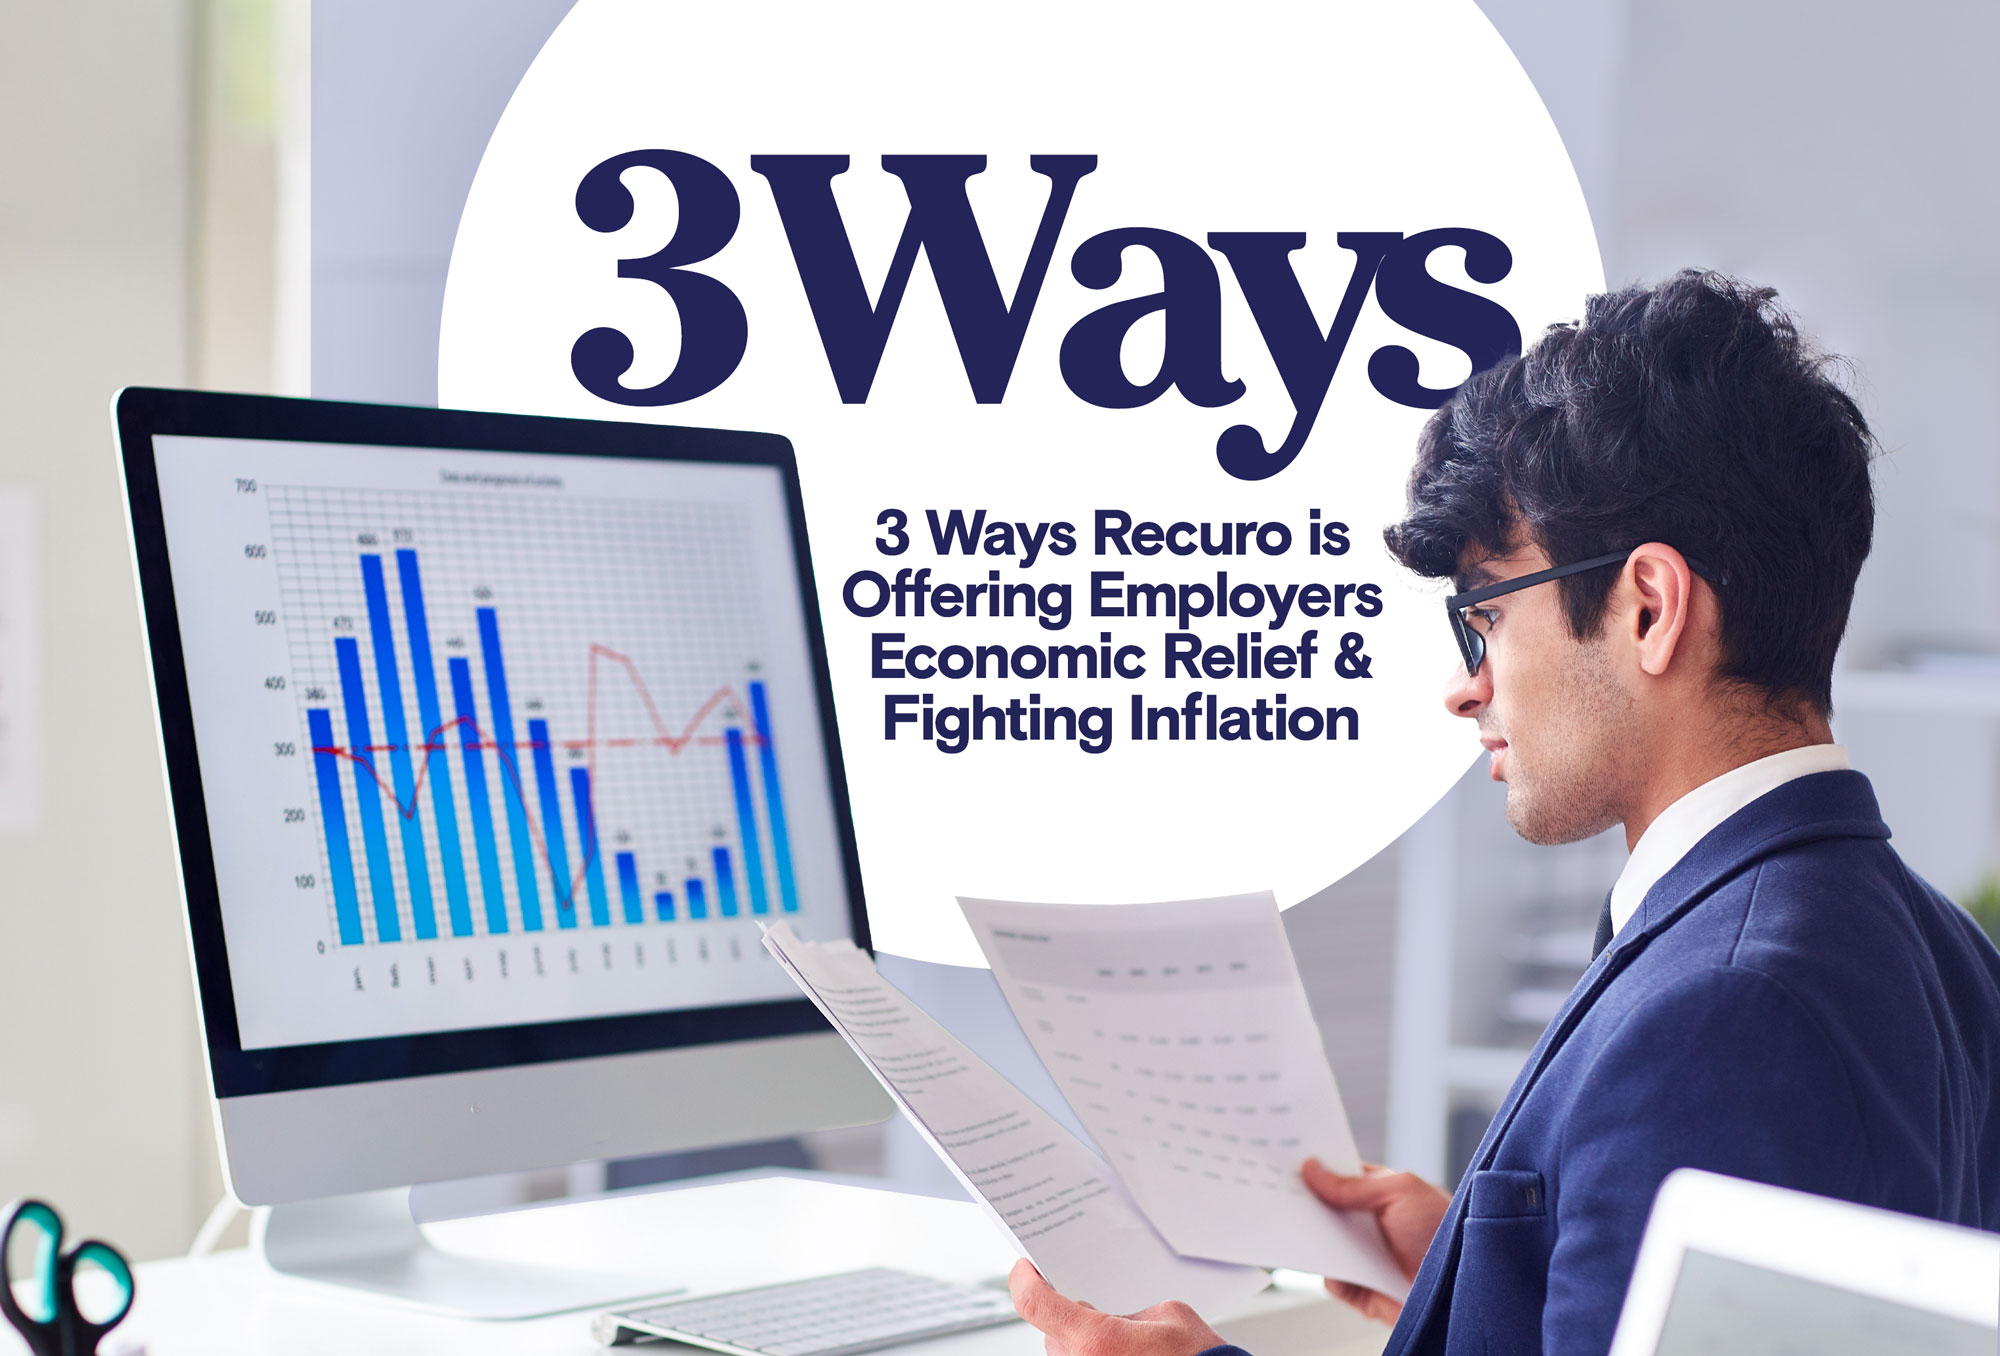 3 Ways Recuro is Offering Employers Economic Relief & Fighting Inflation